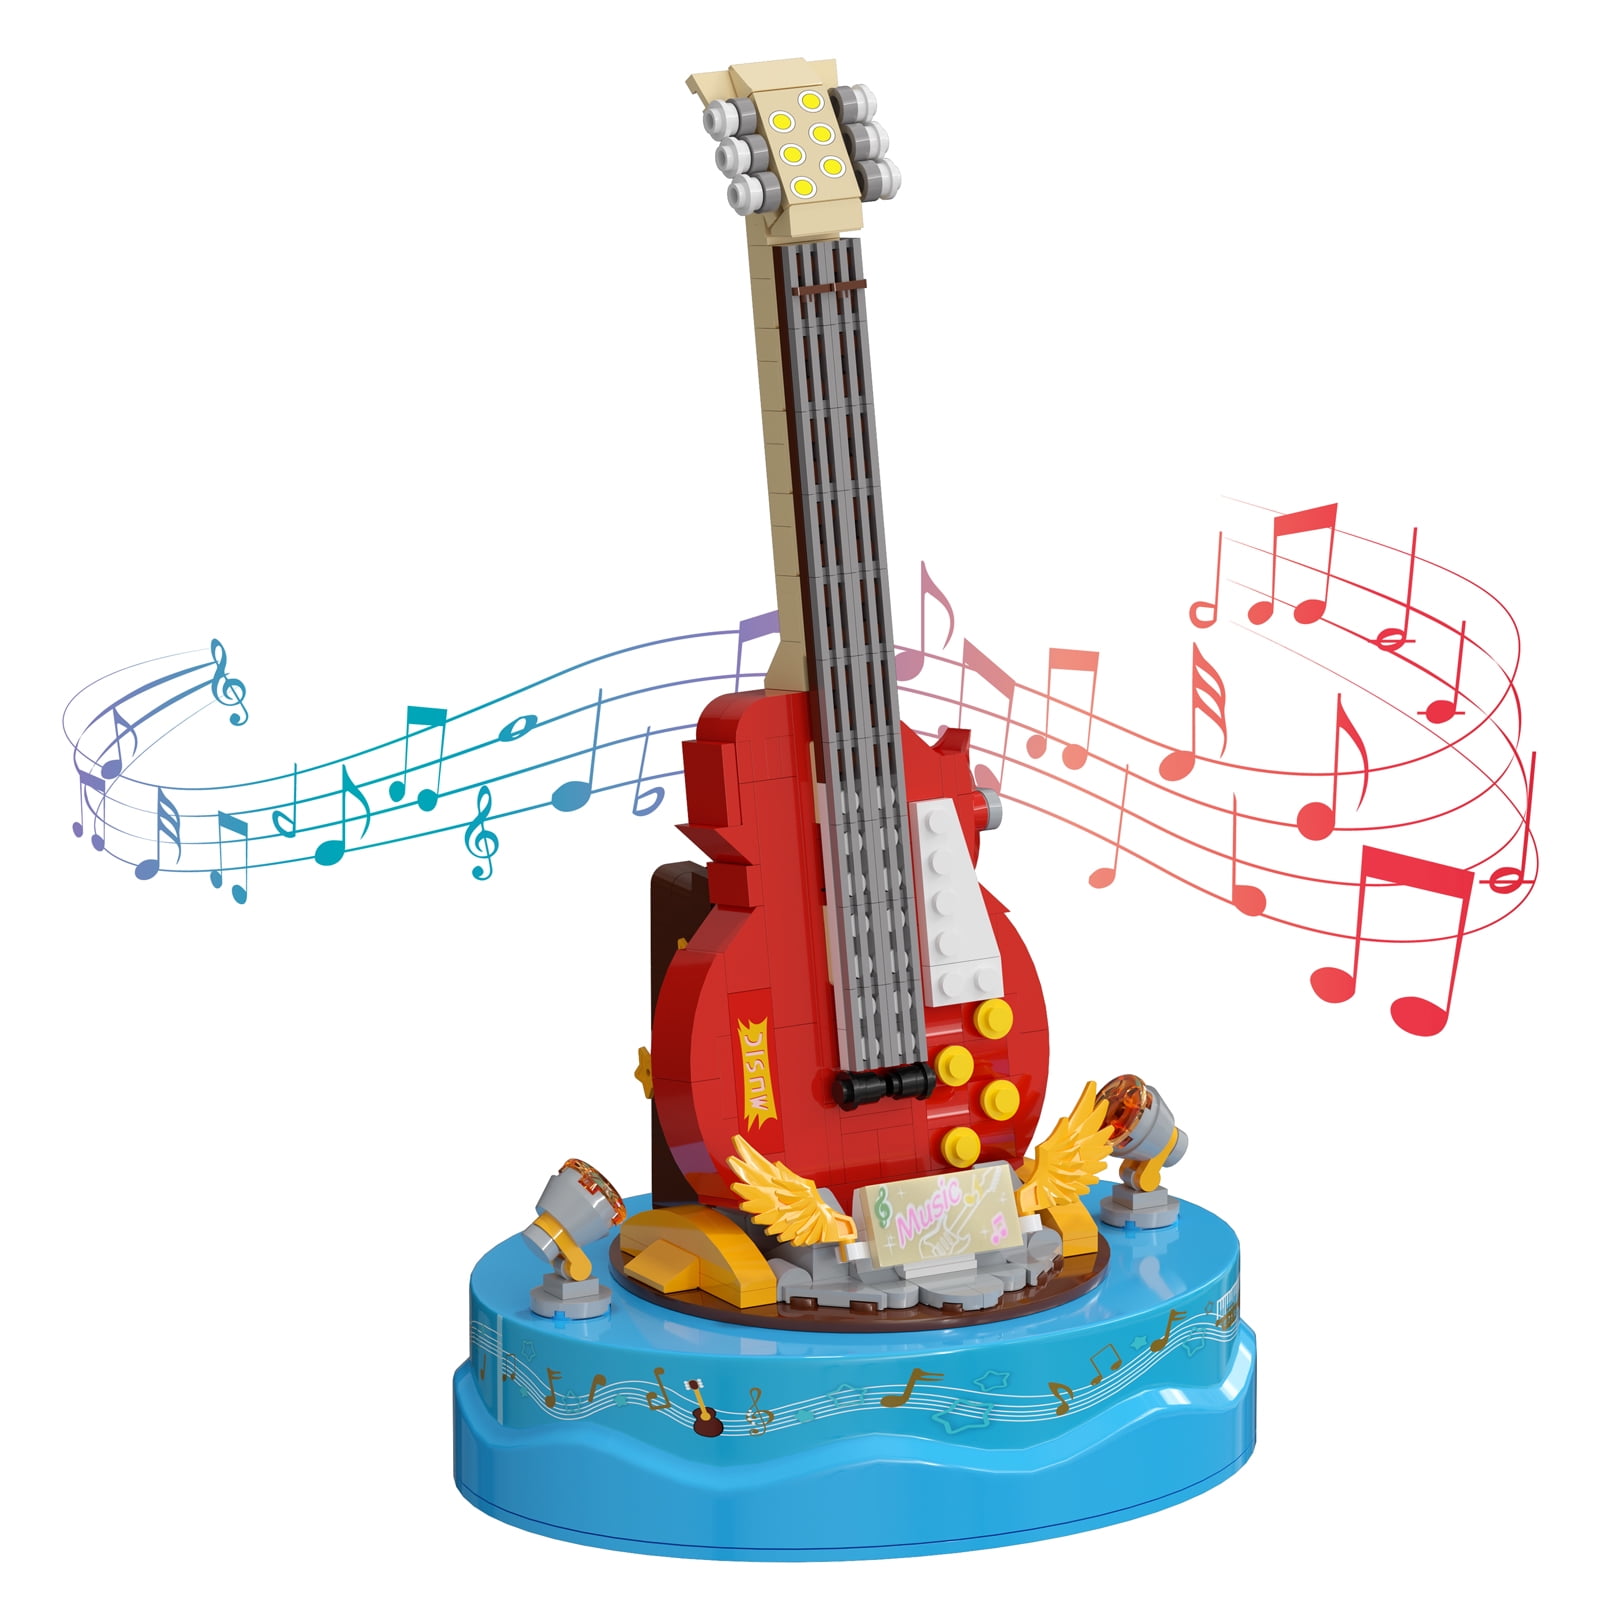 Guitar made of LEGO skillfully played by fifth grader